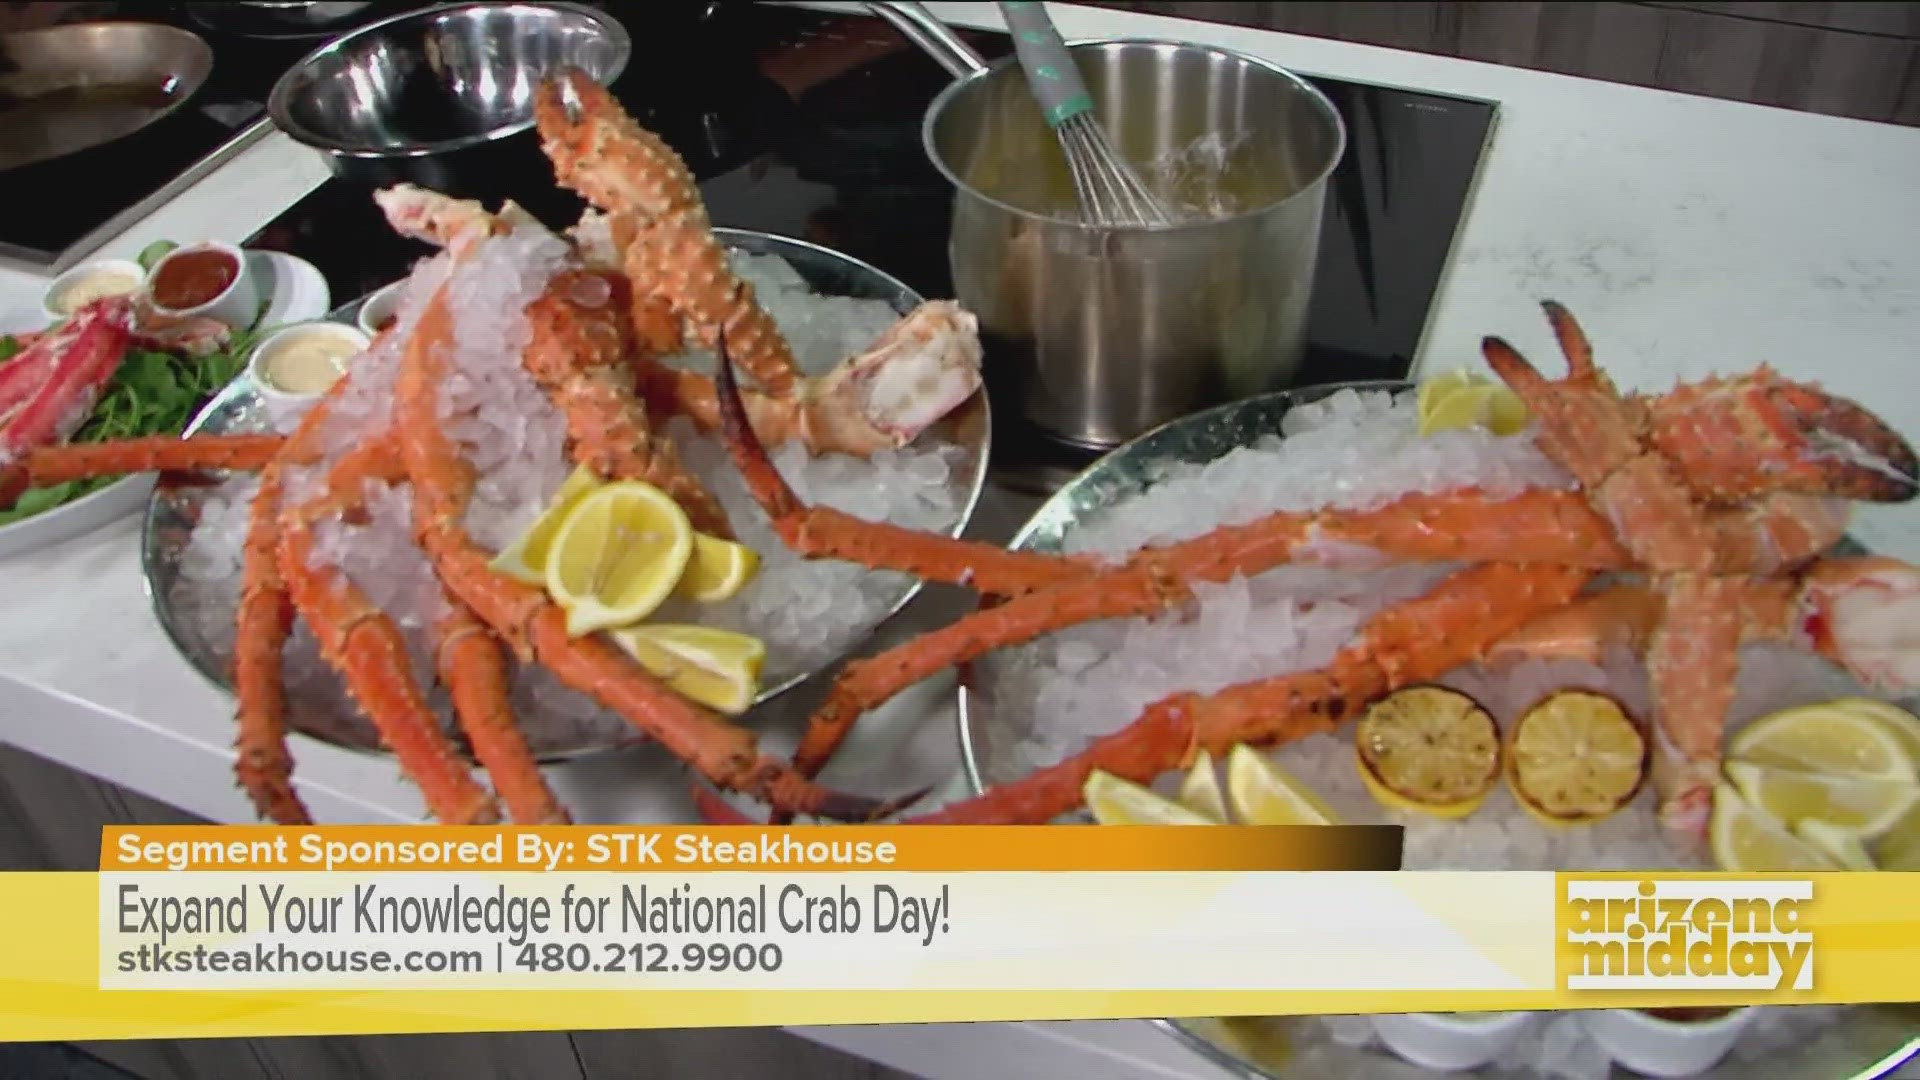 Chef Sia Seifi at STK Steakhouse cooks up several dishes to enjoy on National Crab Day, and tells us about the types of crab and regions they come from.